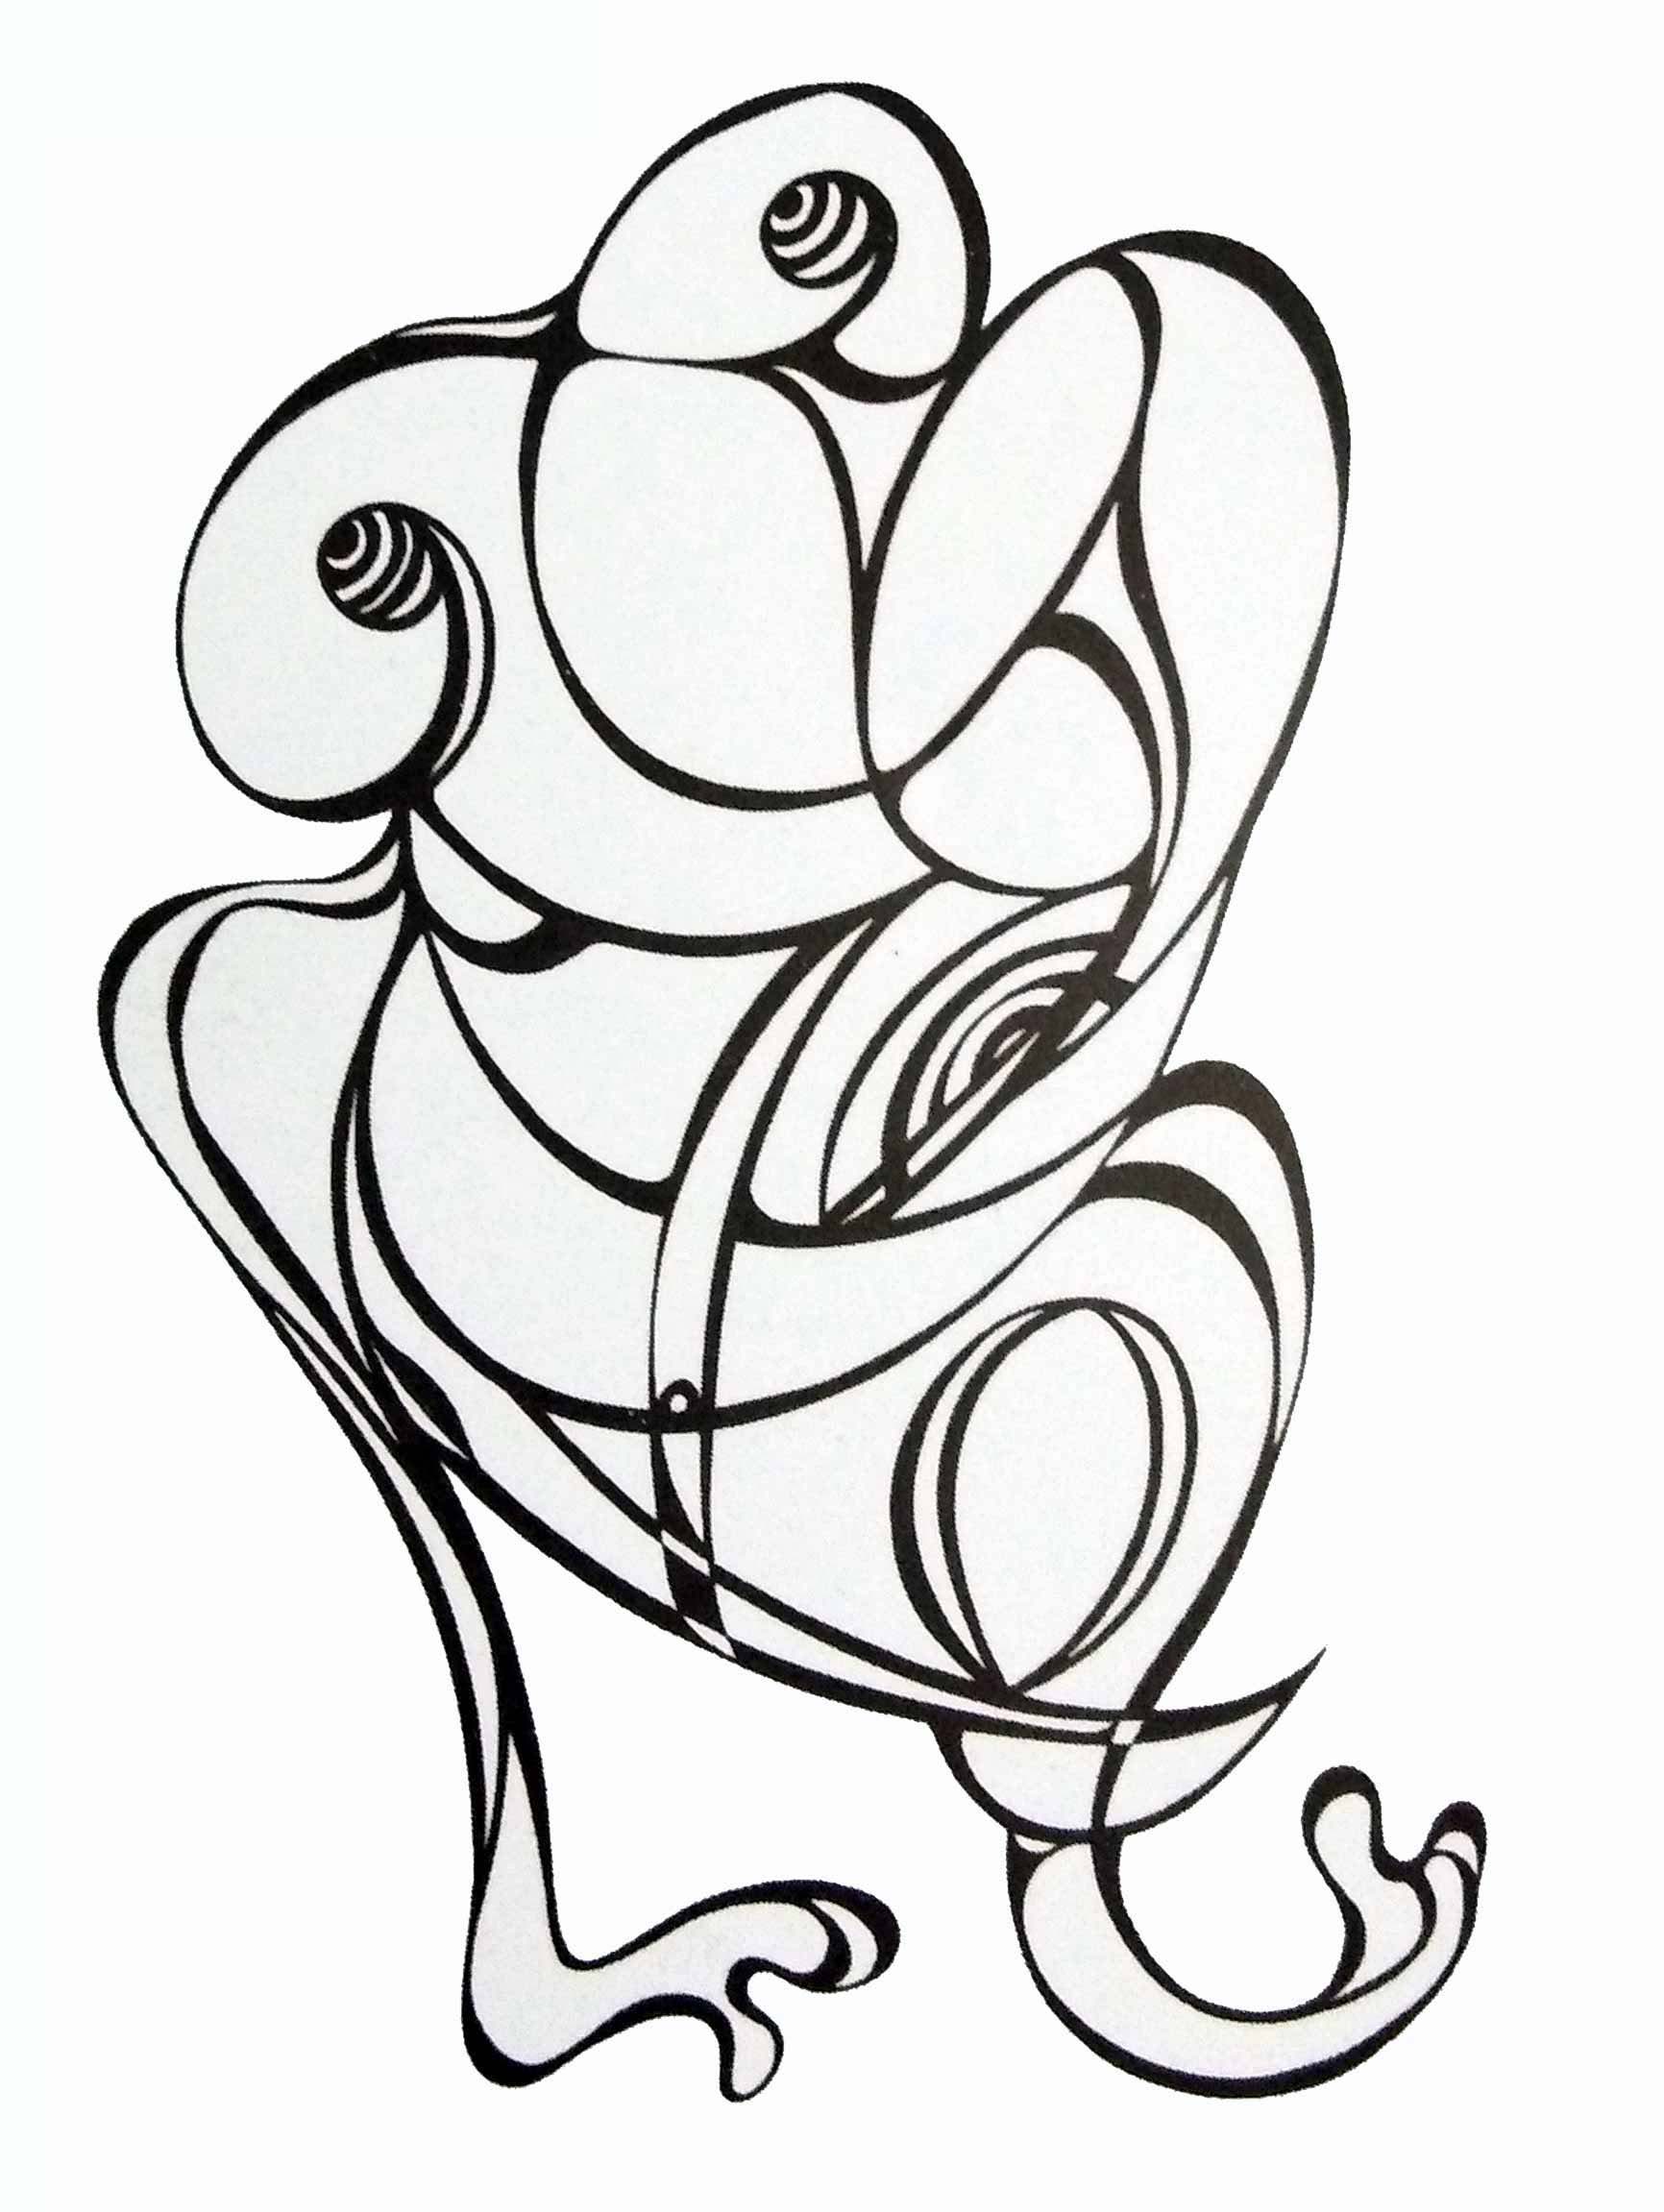 Semi Figurative Drawing with Marker on Paper "Untitled - 1" art by Narendra Kumar Verma